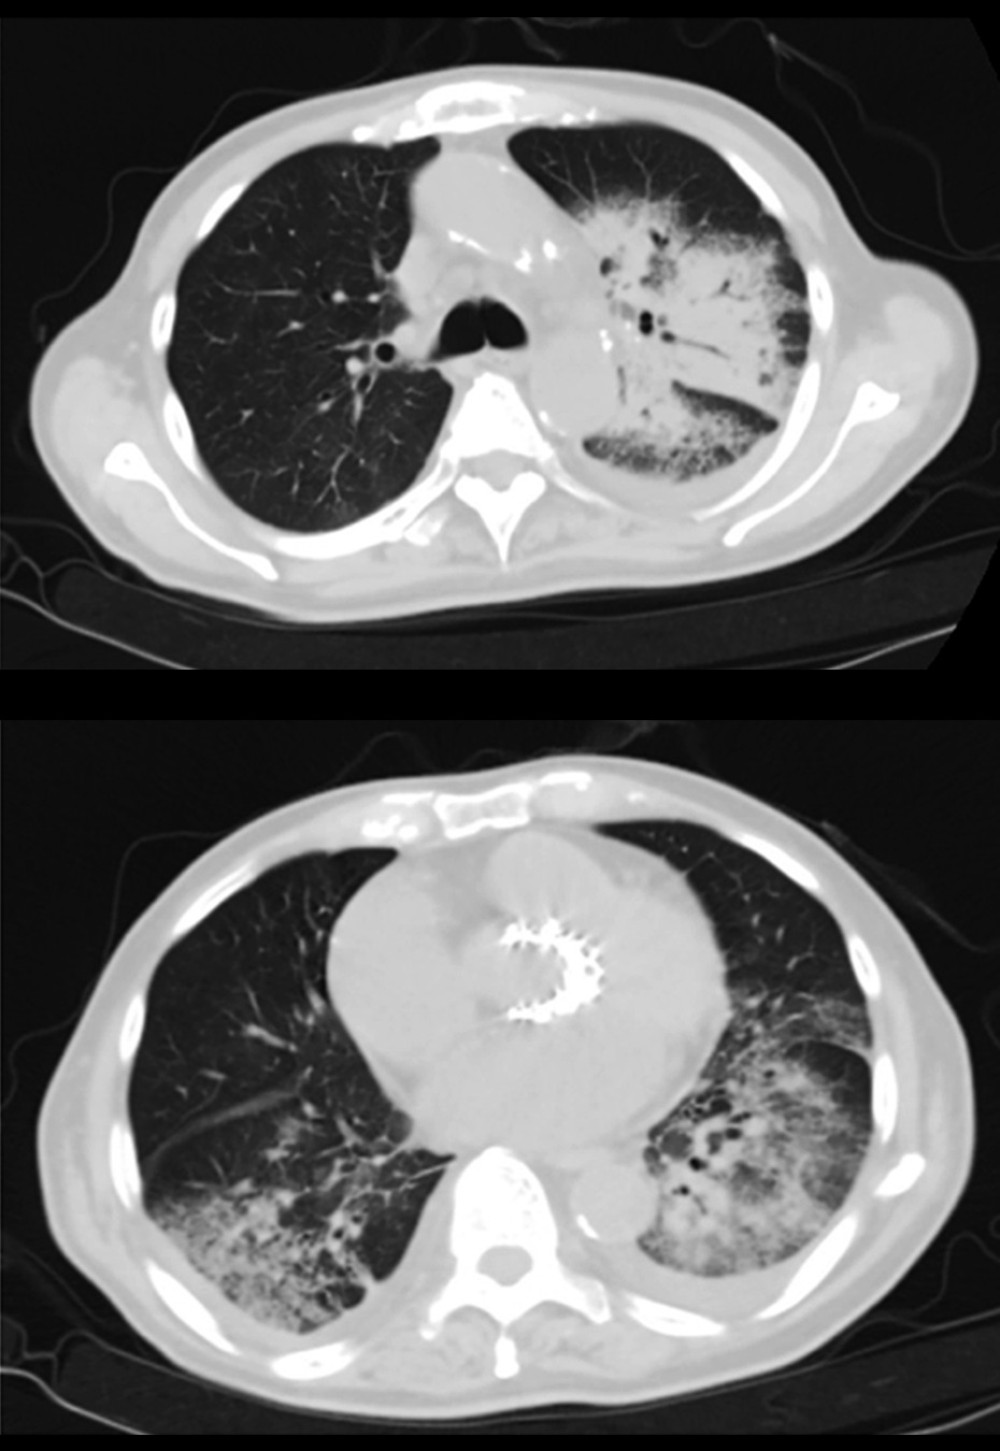 Chest computed tomography images are consistent with the findings from the chest radiograph.